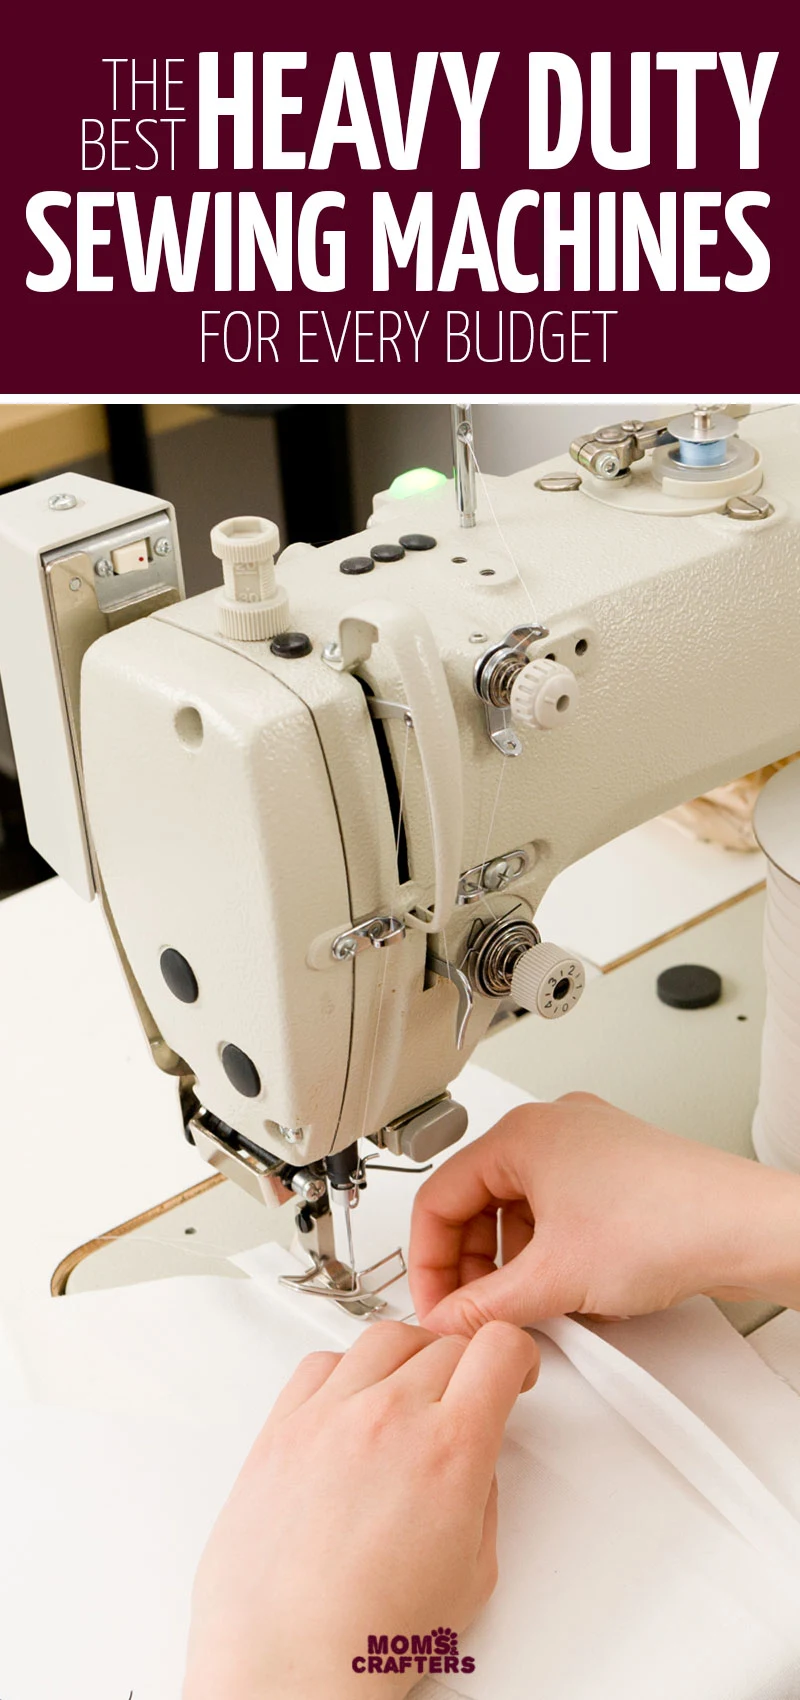 Looking for the best heavy duty sewing machine for your needs? Click for a list of some of my favorites for sewing heavyweight fabrics including sewing tips for buying a very versatile machine.